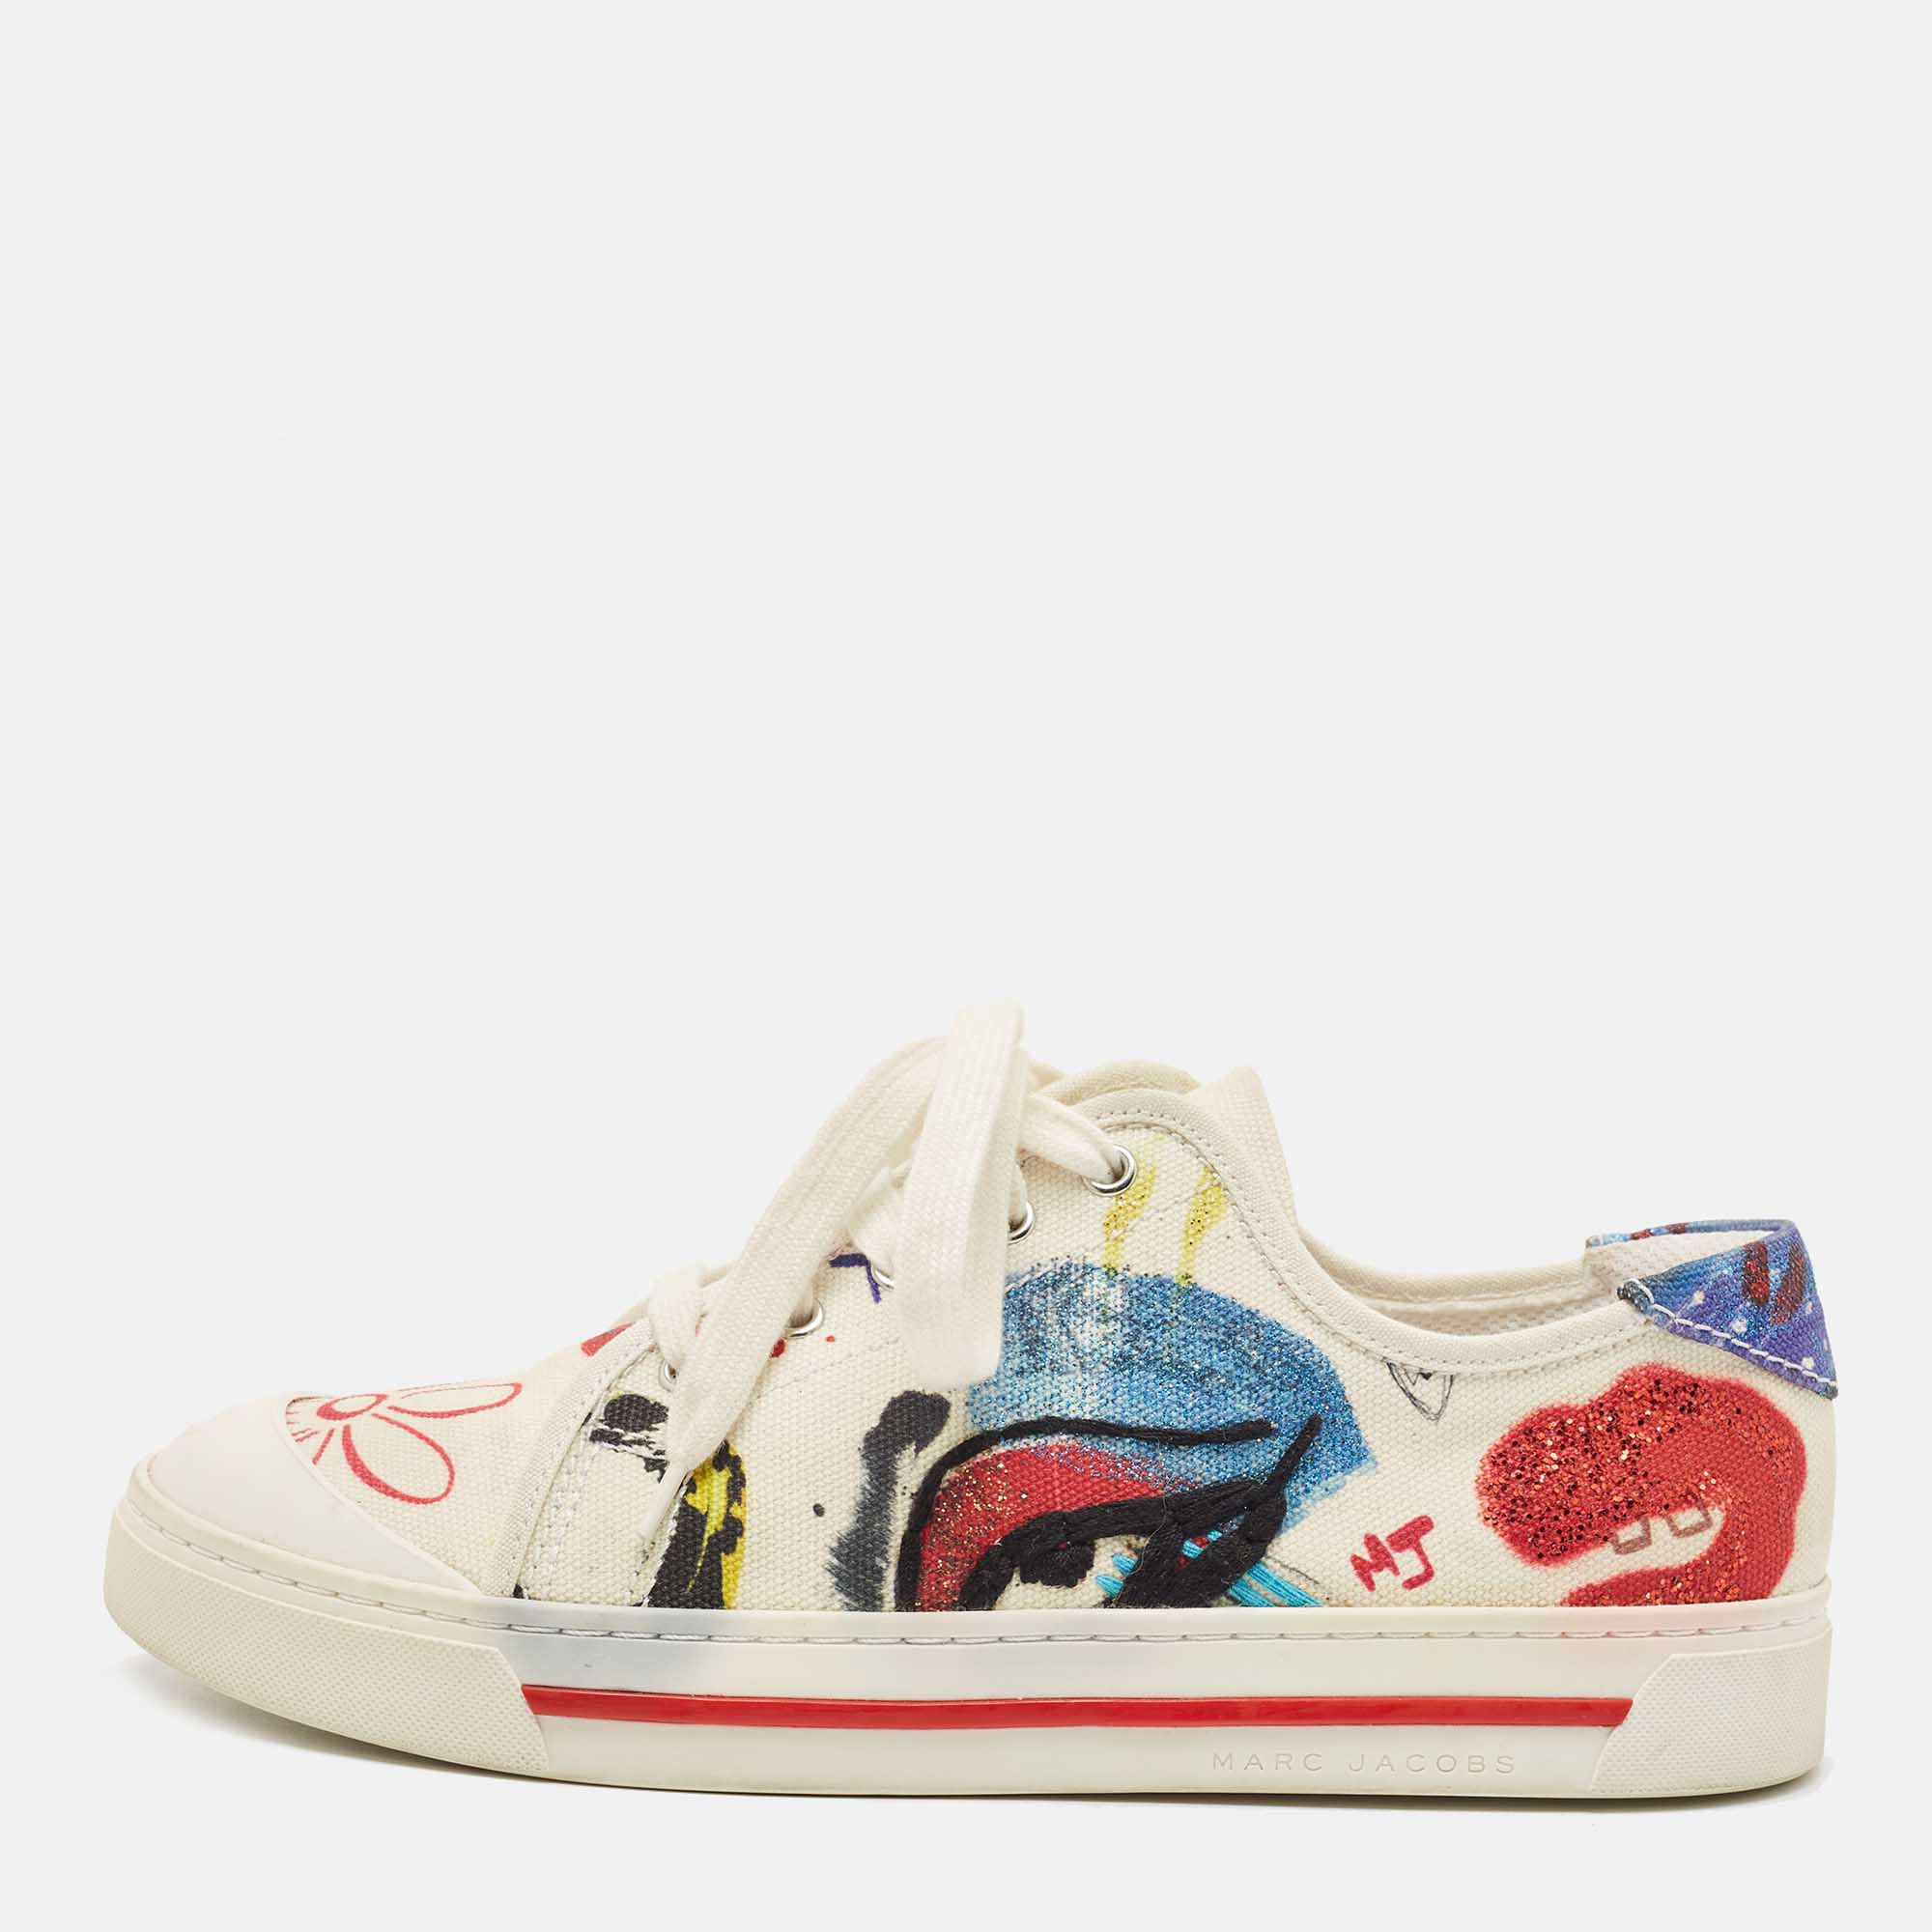 Marc Jacobs Multicolor Flower Print Low Top Sneakers Size 39